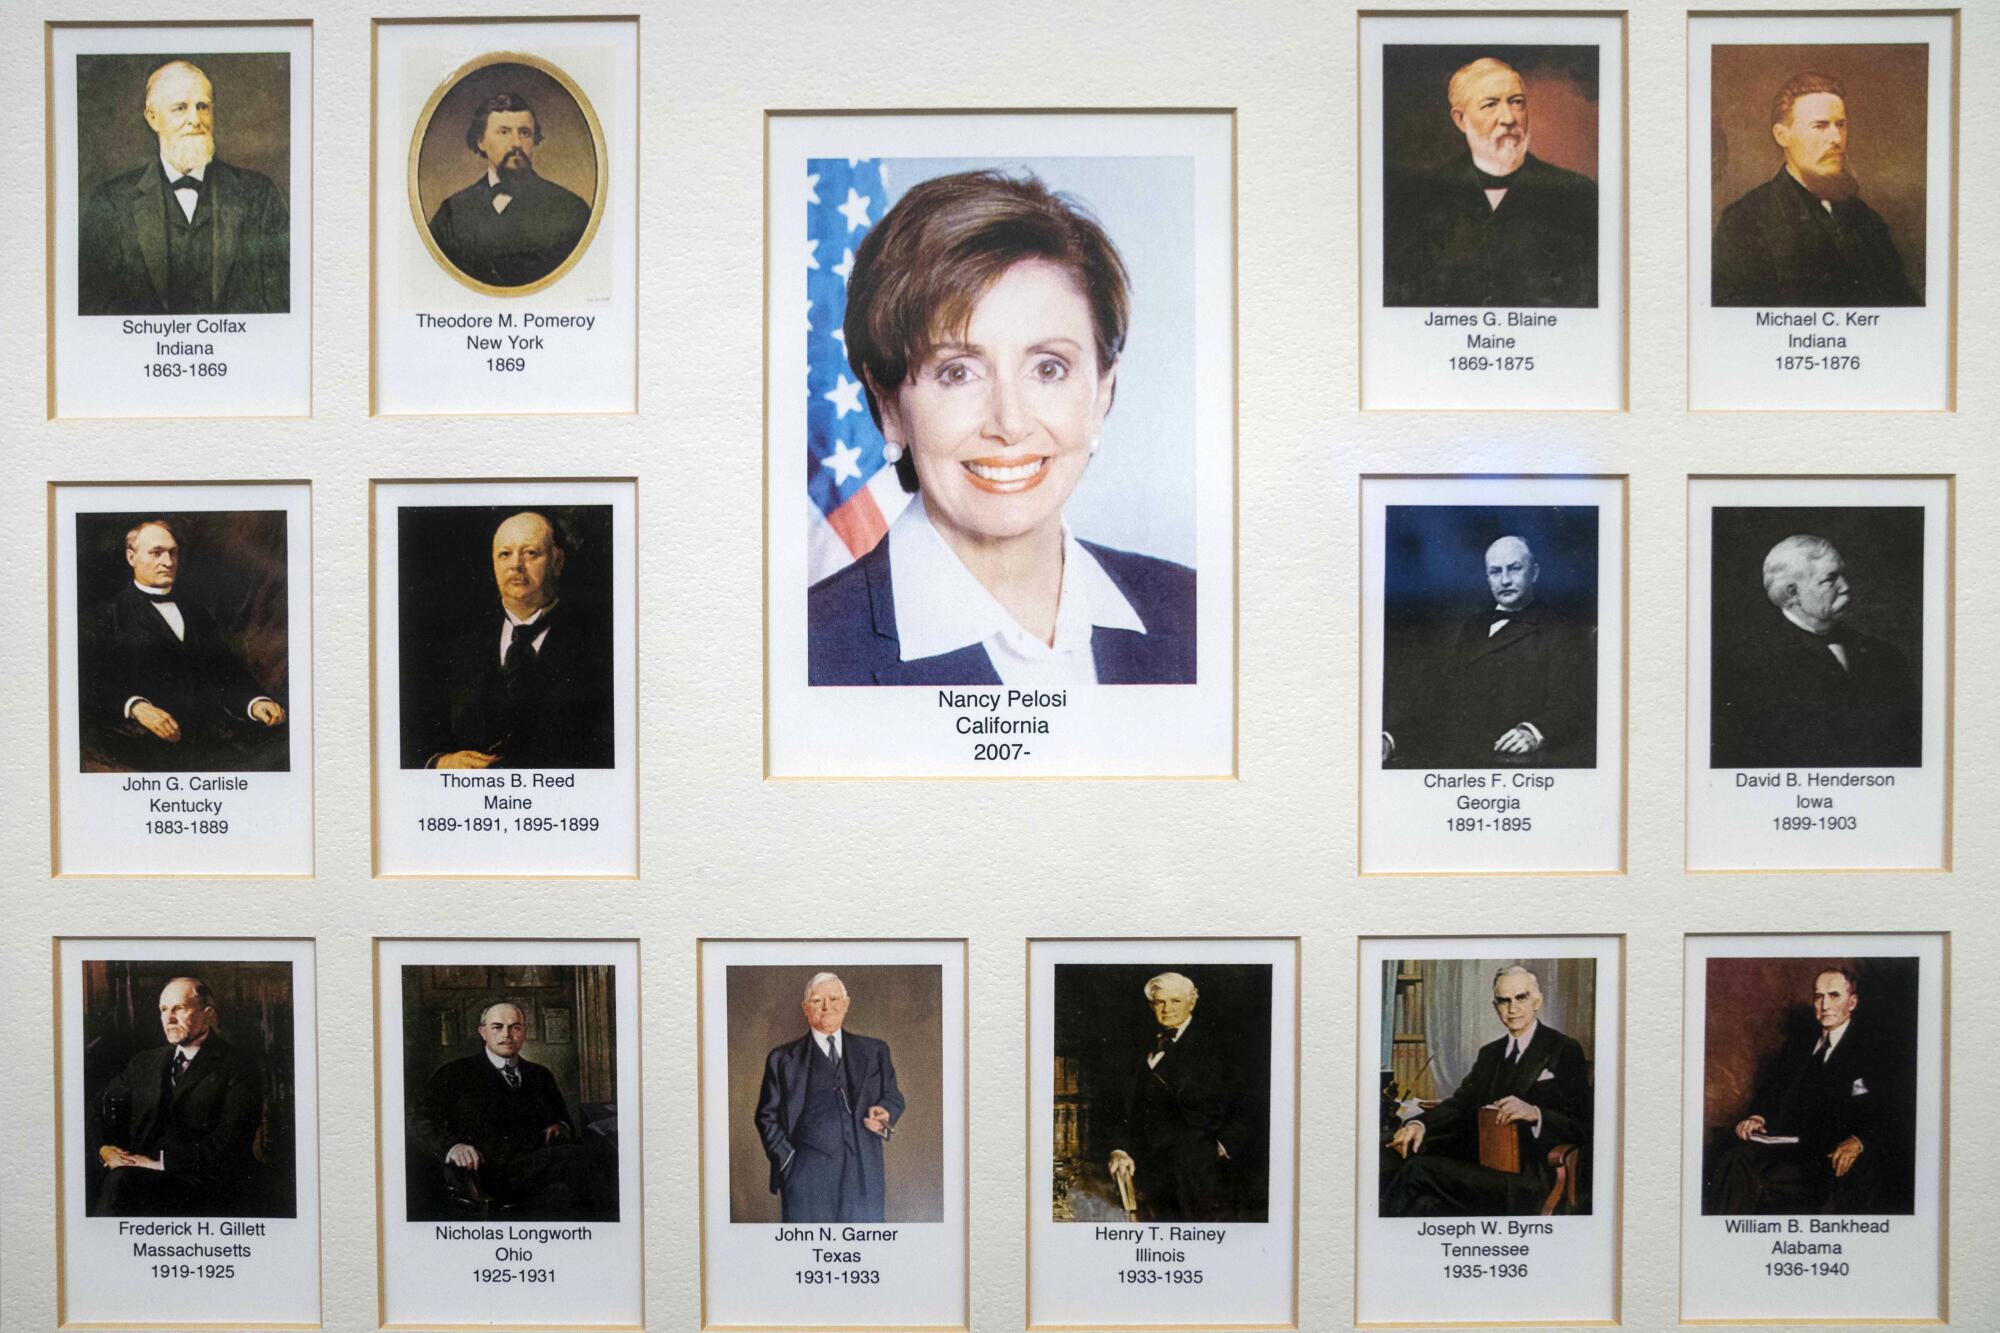 An image of Nancy Pelosi is at the center of a collage of former speakers of the House 